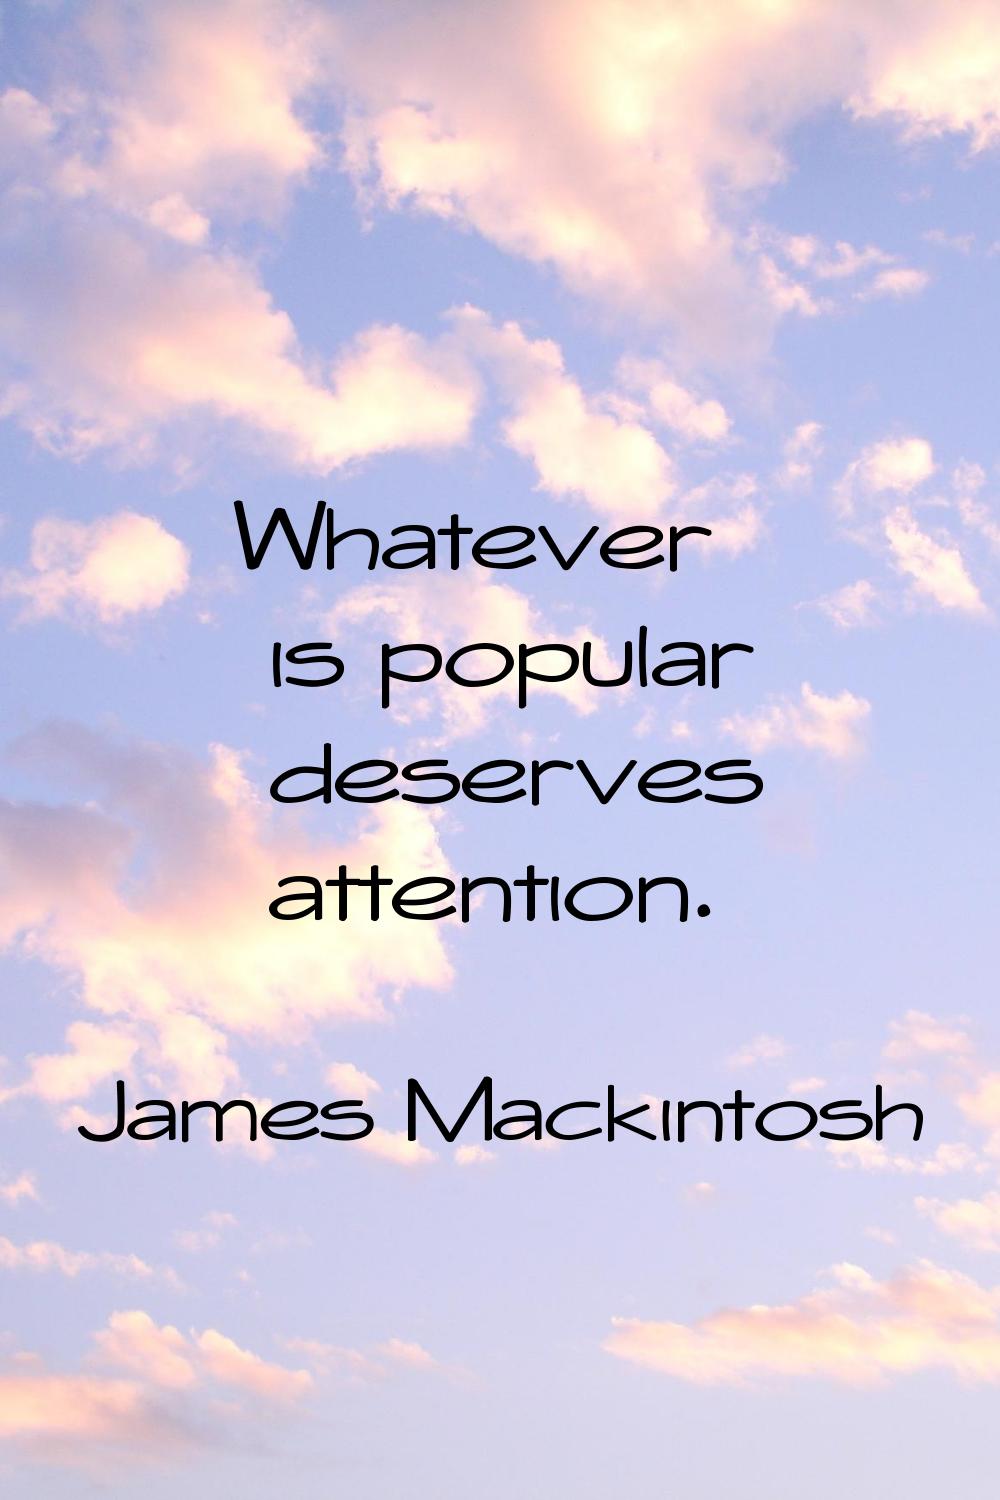 Whatever is popular deserves attention.